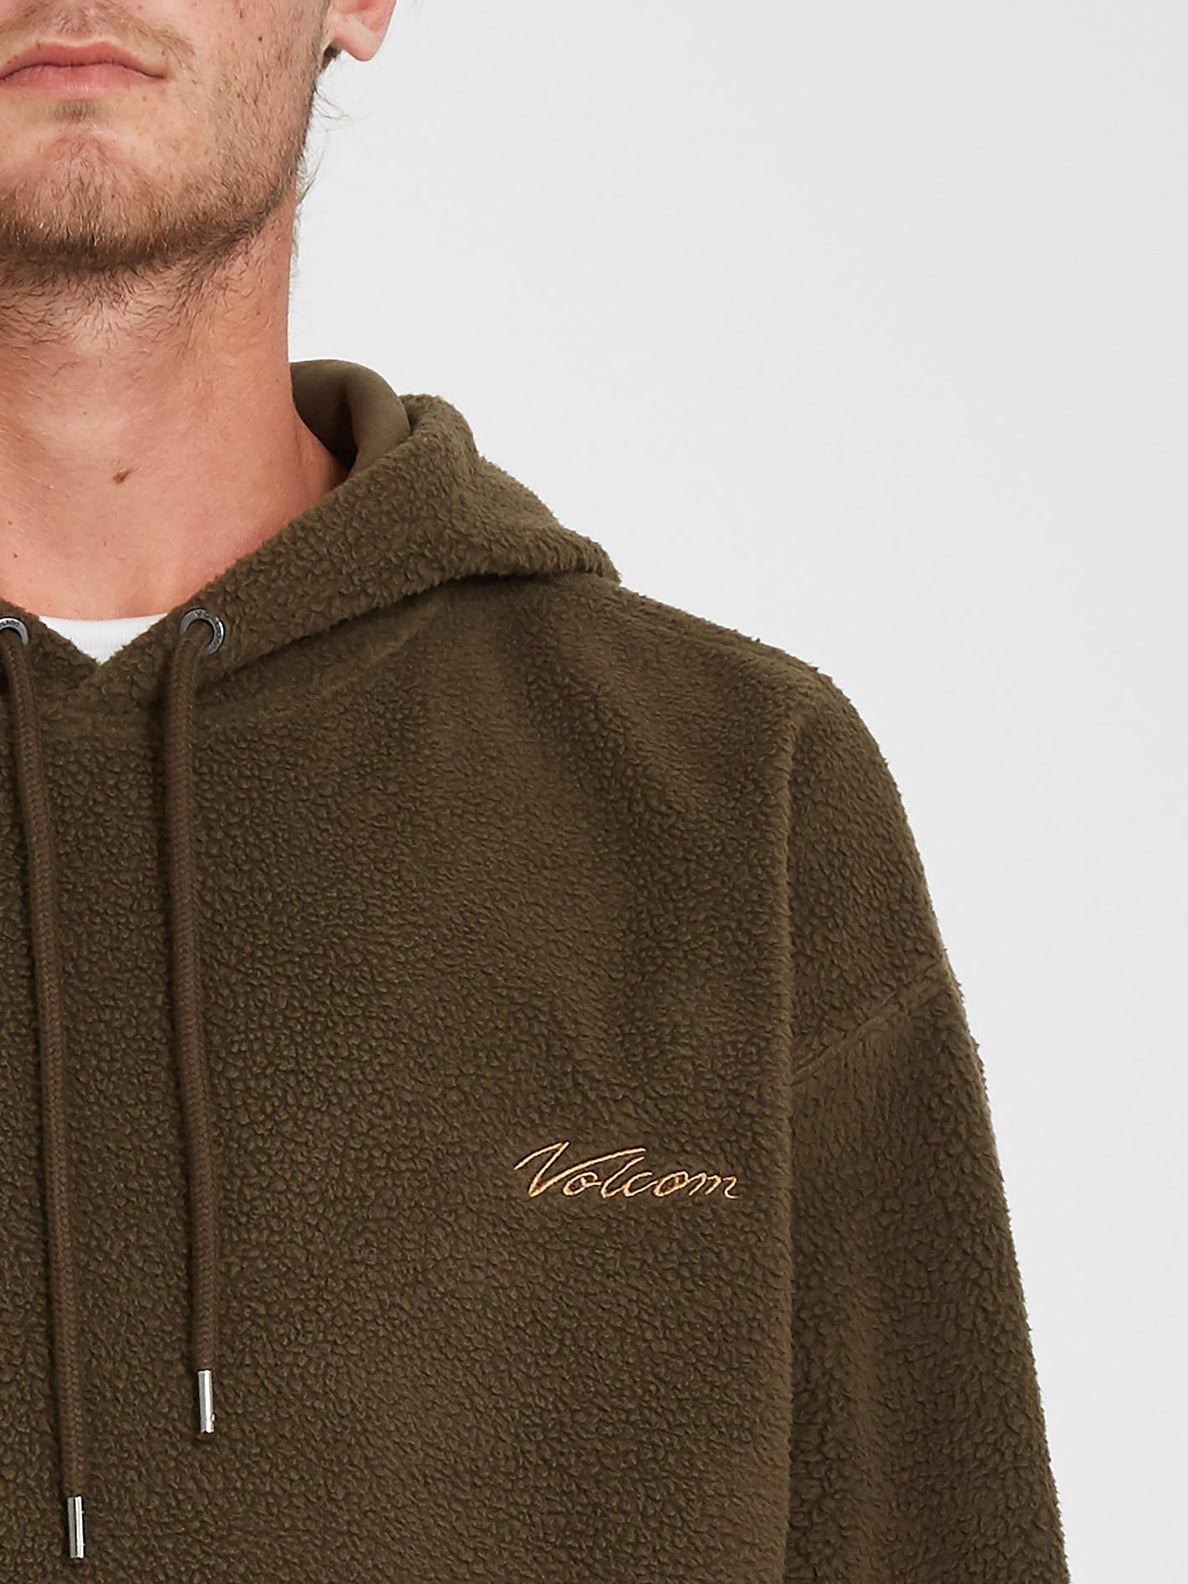 Throw Exceptions Hoodie - WREN (A4132101_WRE) [2]